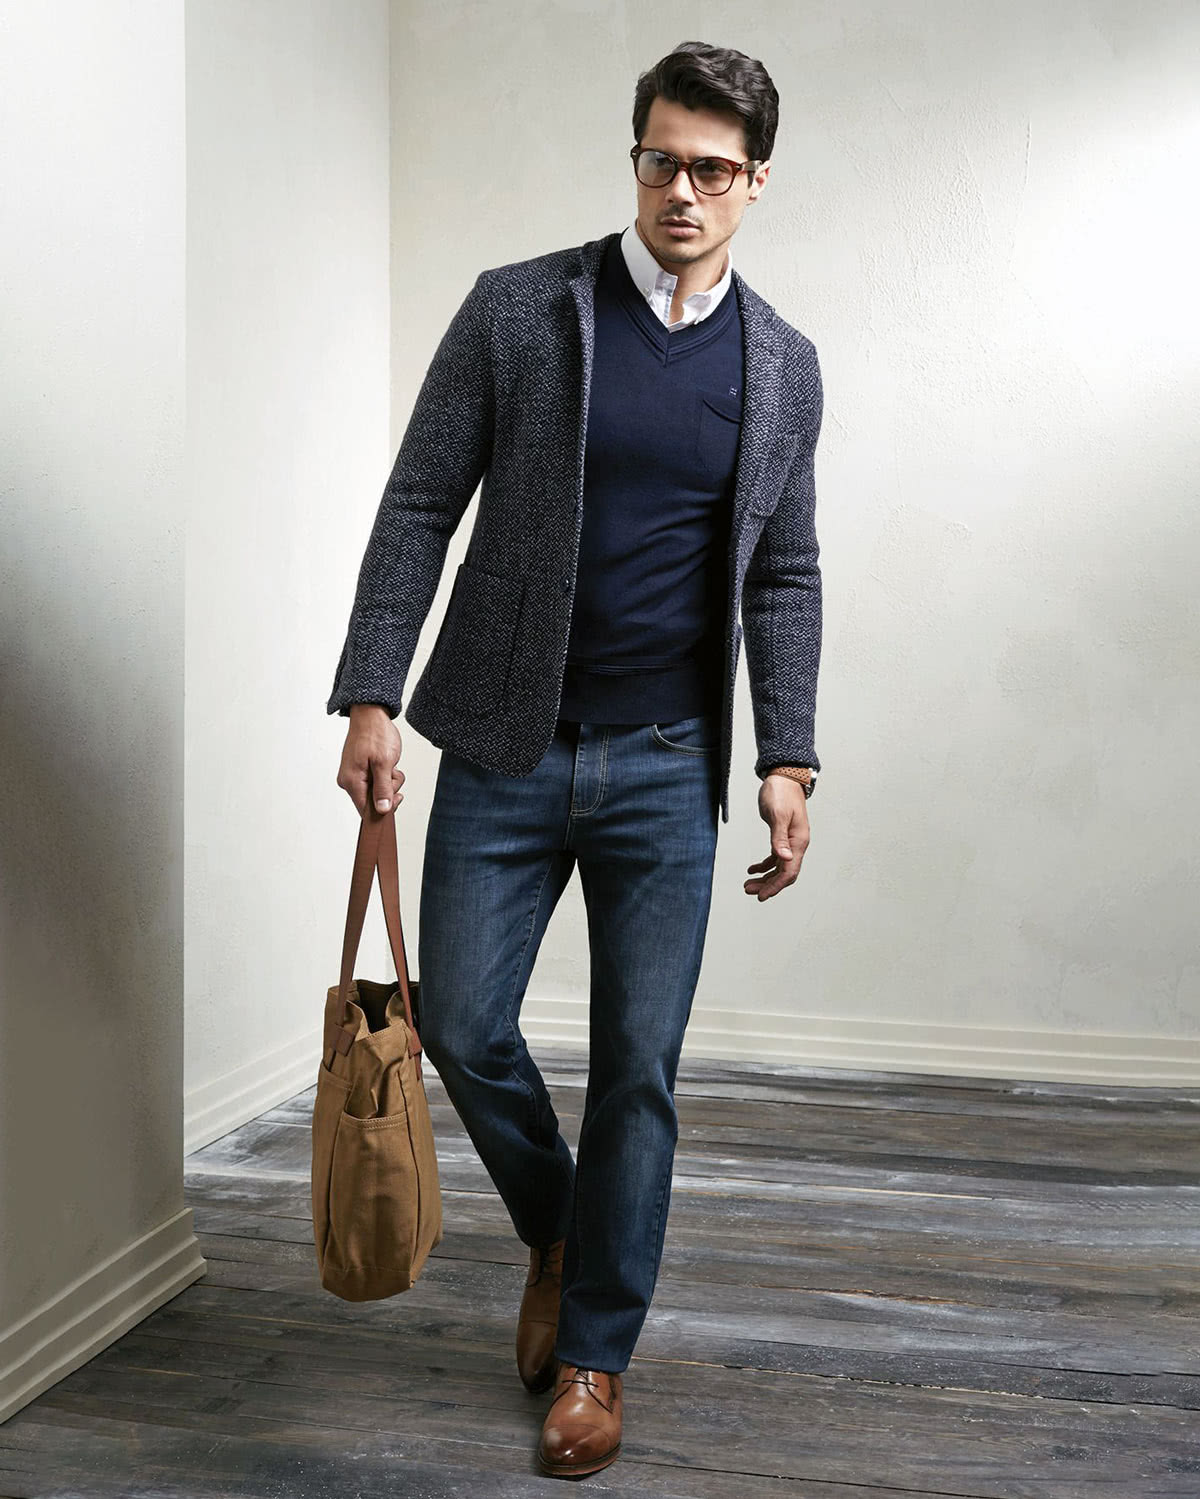 Smart Casual Dress Code For Men: Ultimate Style Guide (2020 Updated)